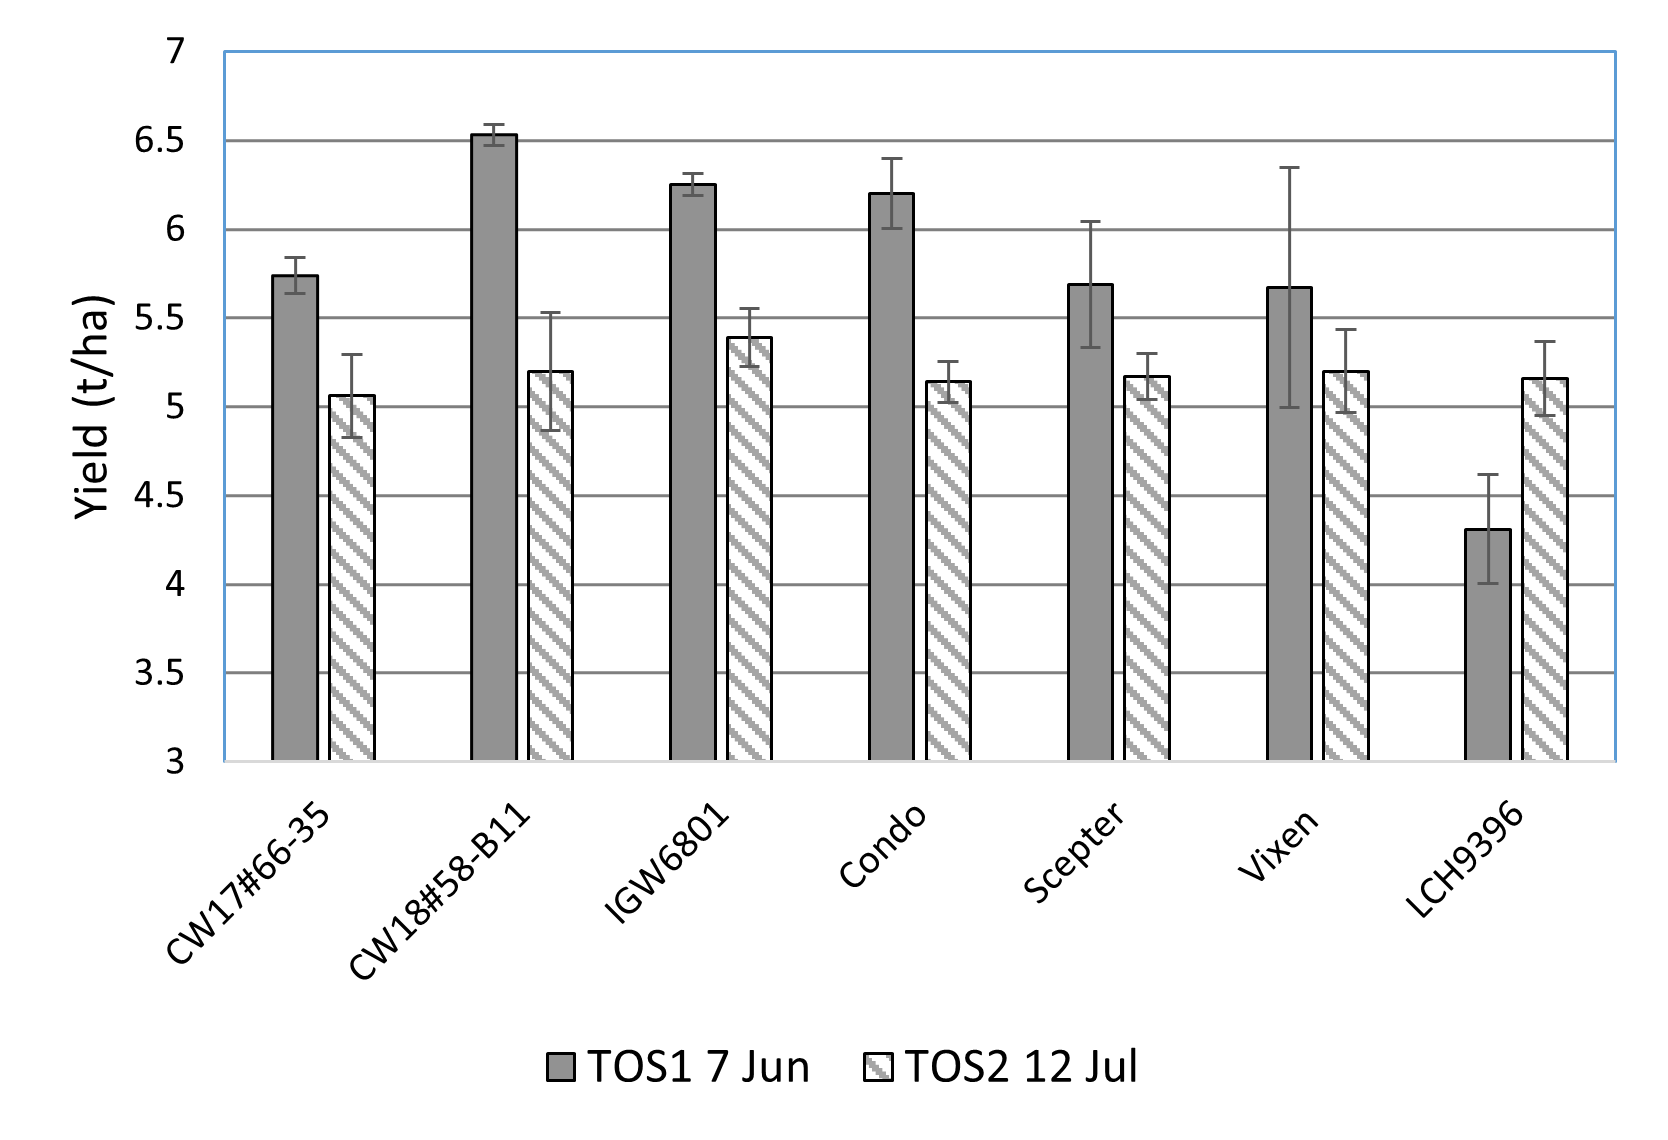 Grain yields of selected wheat lines sown on two sowing dates (TOS) at Wagga Wagga in 2021. Closed horizontal bars represent standard errors. Lsd (Genotype) = 0.75t/ha, Lsd (TOS) = 0.11t/ha, Lsd (Genotype × TOS) = 1.07t/ha.